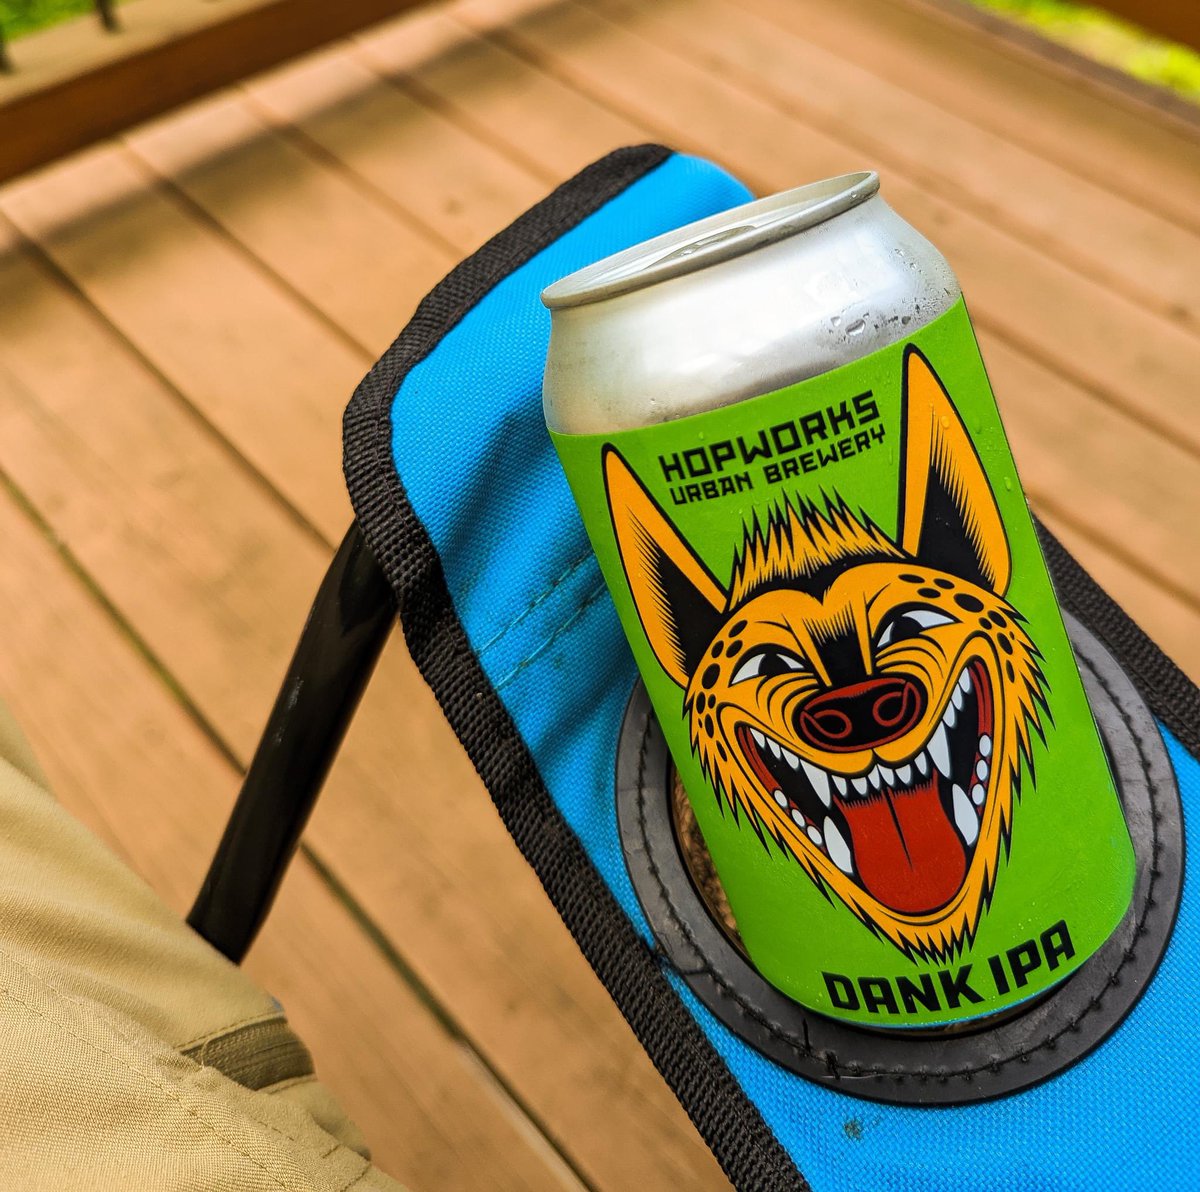 When you've got a case of the giggles, it's probably 'cause you're crushing some Giggle Nuggets! Get your 6-pack at a retailer or bottle shop near you. Sunny summer days are just around the corner!